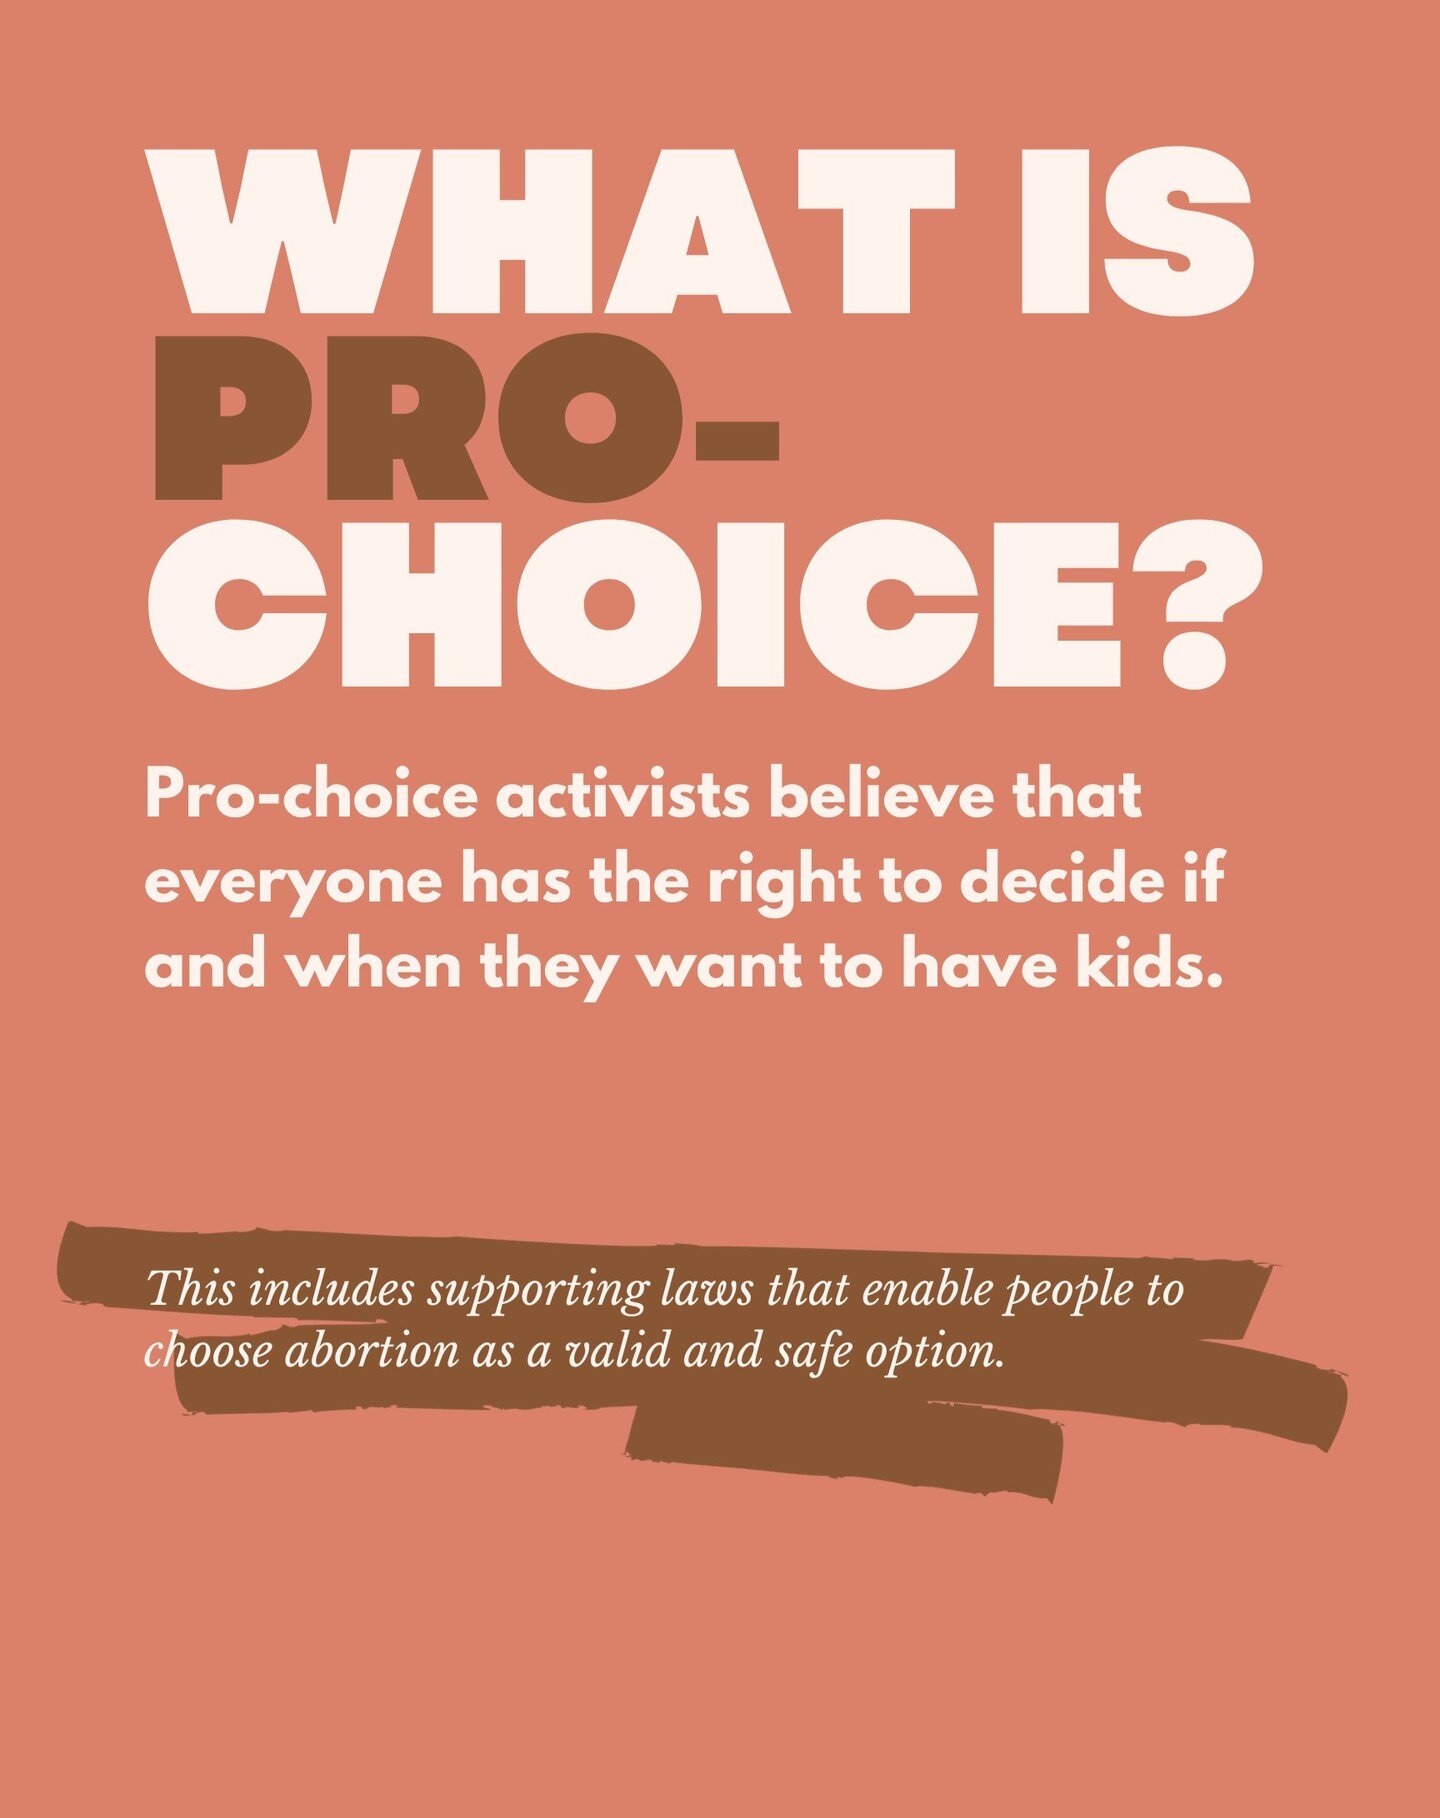 We support everyone having equal rights, regardless of gender! #prochoice #abortionrights #feminism #feminist #humanrights #womensrights #abortionishealthcare #reproductiverights #proabortion #equality